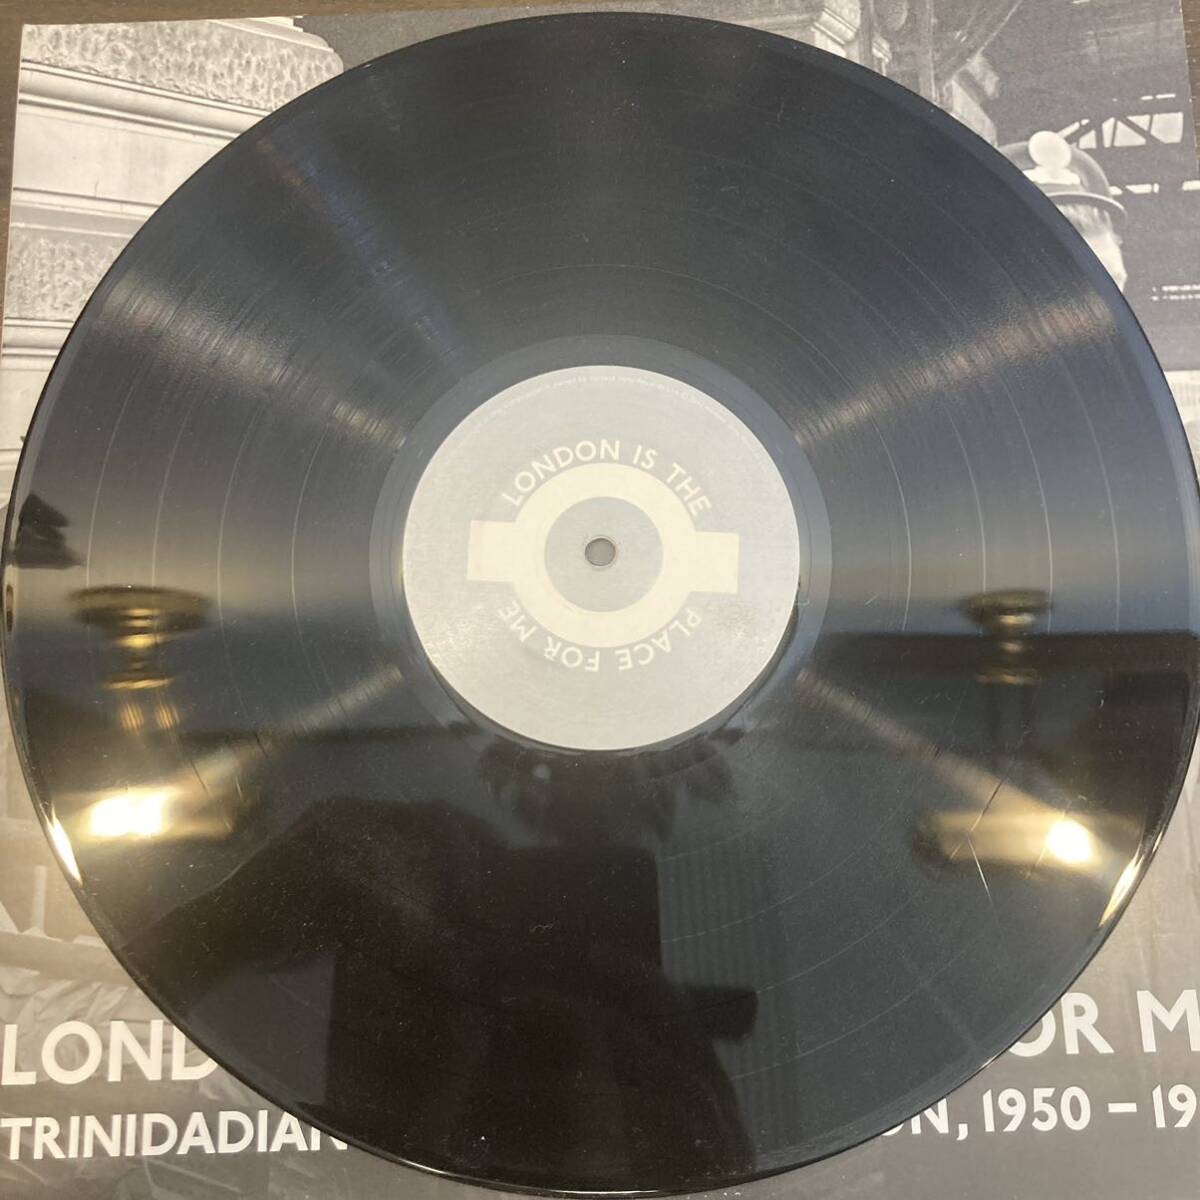 【2LP 】V.A. / London Is The Place For Me (Trinidadian Calypso In London, 1950 - 1956)UK盤 レコードの画像6